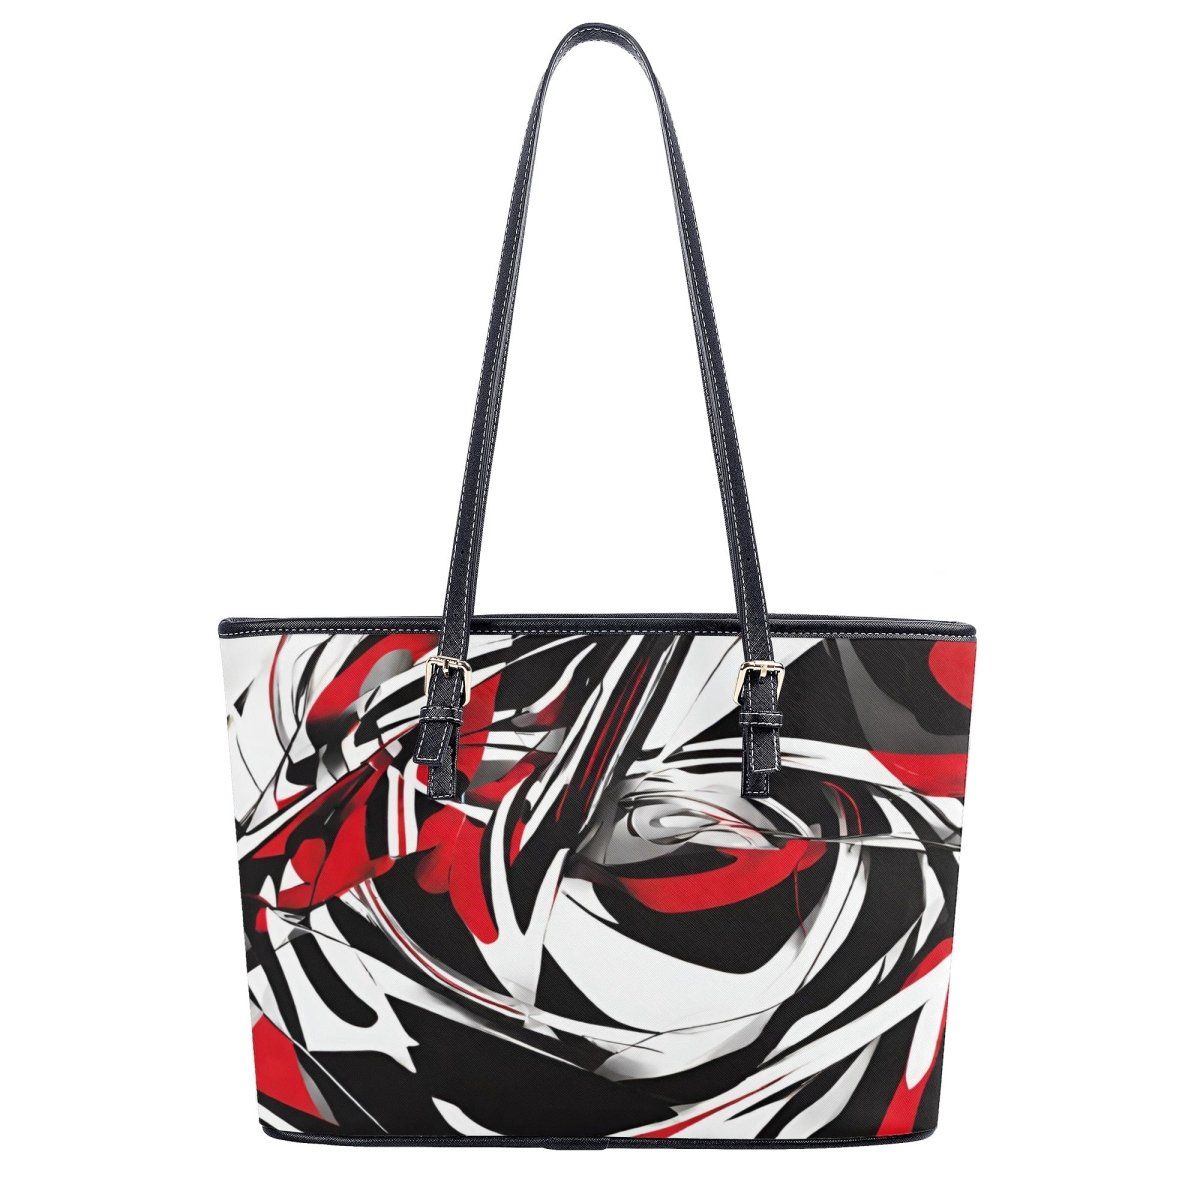 Timeless Trio Red Black and White Tote Bags - Fashion Must-Haves - Iron Phoenix GHG